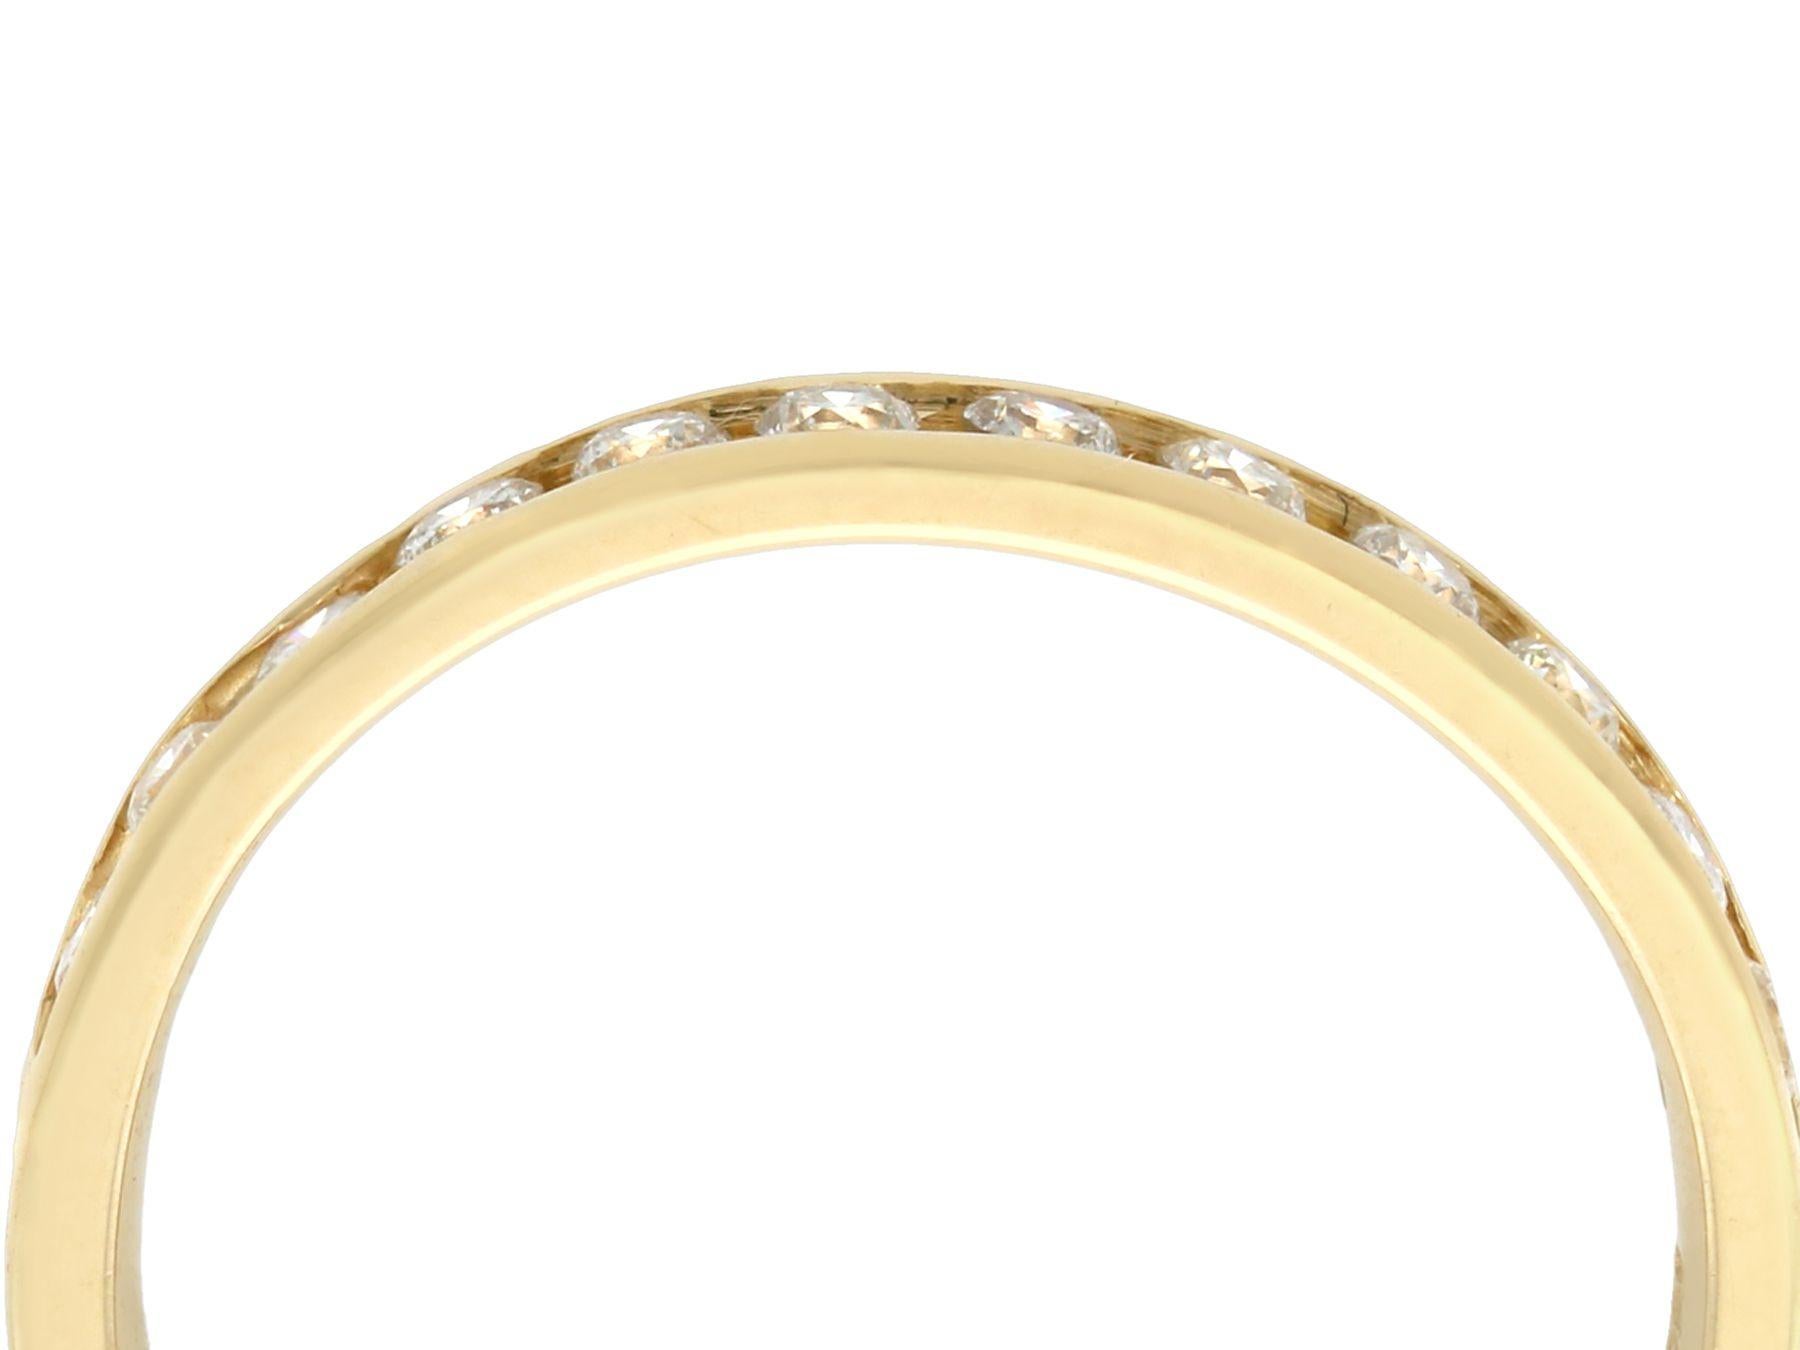 An impressive vintage 1990s 0.39 carat diamond and 14 karat yellow gold half eternity ring; part of our diverse diamond jewelry and estate jewelry collections

This fine and impressive vintage eternity ring has been crafted in 14k yellow gold.

The